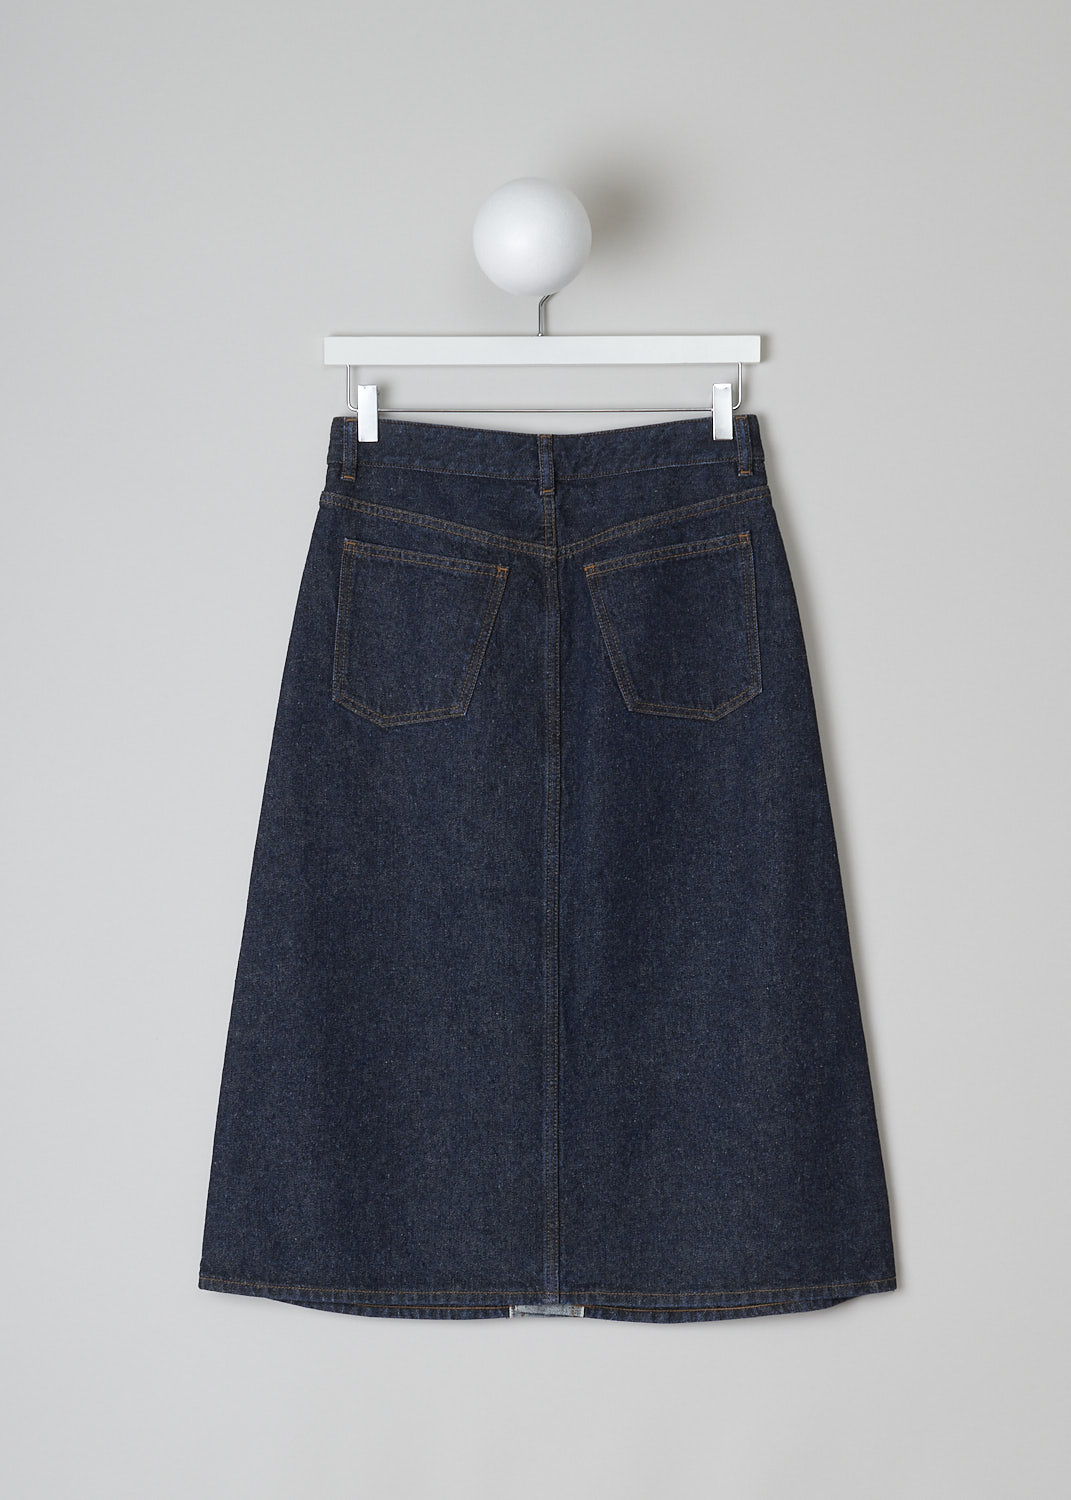 CHLOÃ‰, A-LINE DENIM MIDI SKIRT IN ICONIC NAVY, CHC22ADJ6615748A_SKIRT_ICONIC_NAVY, Blue, Back, This denim A-line midi skirt in Iconic Navy has a waistband with belt loops and the brand's logo embroidered on the front. The skirt has a front button closure. This skirt has a 5-pocket design, with two slanted pockets and a coin pocket in the front and two patch pockets in the back.  
